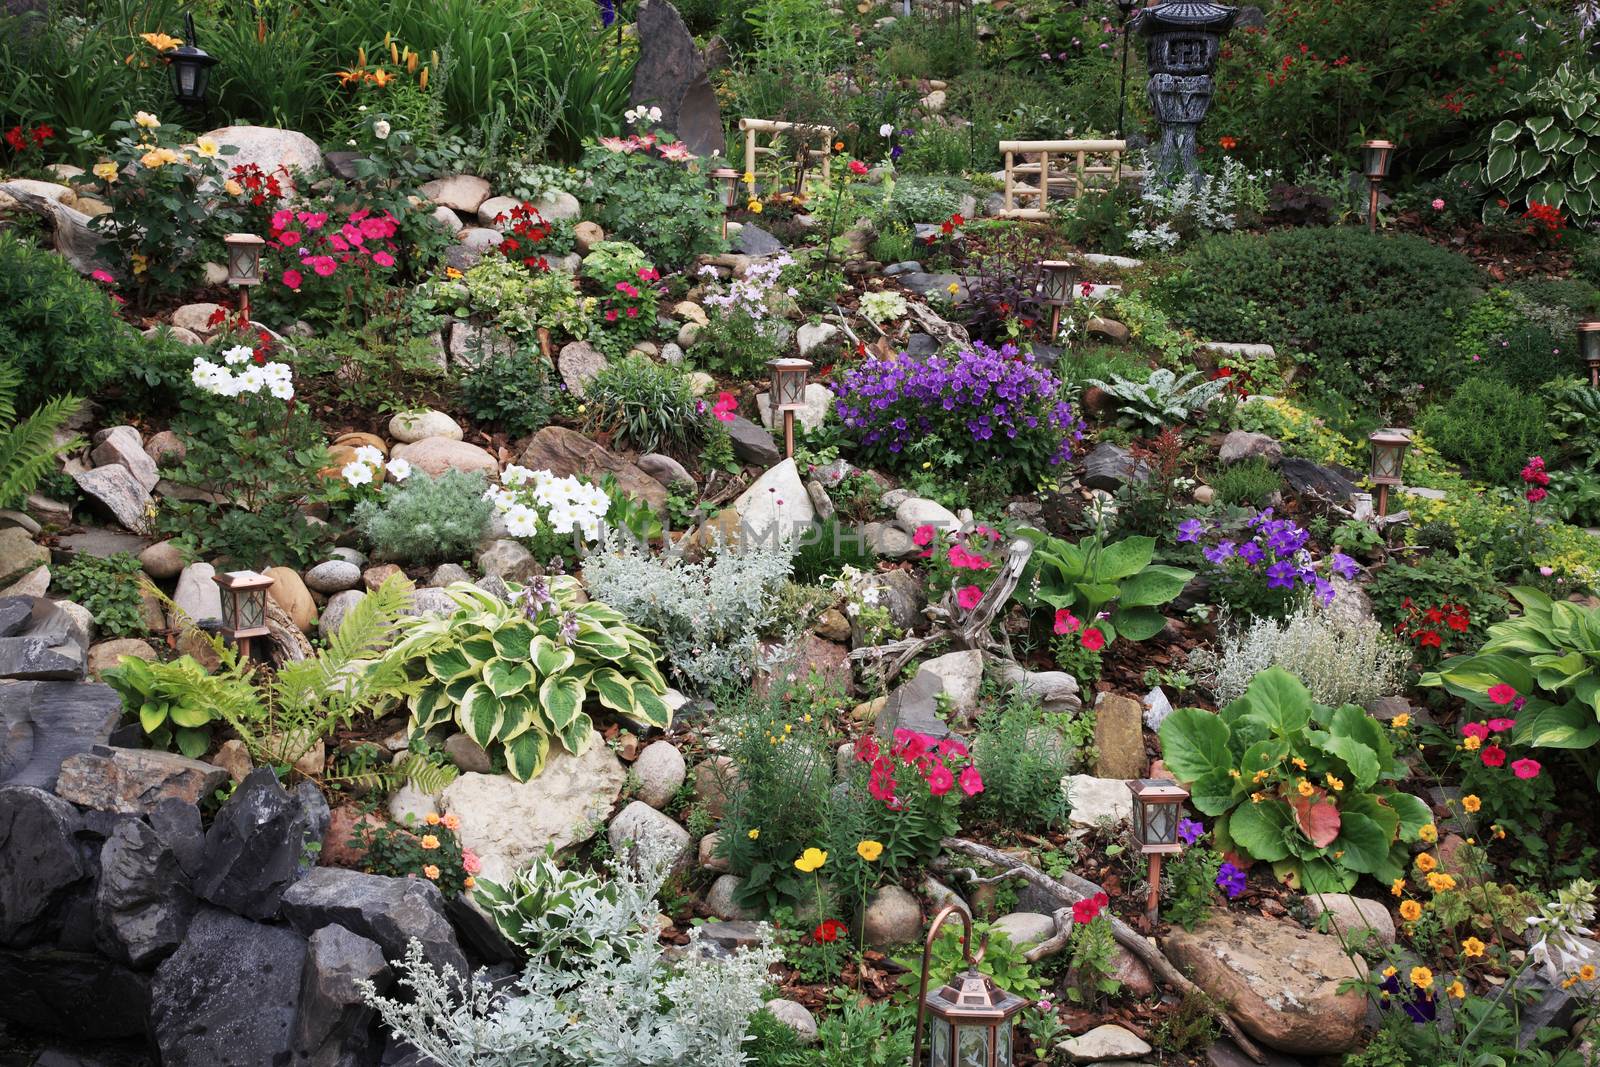 A beautiful perennial garden planted on a difficult slope.  Extreme gardening at it's best!